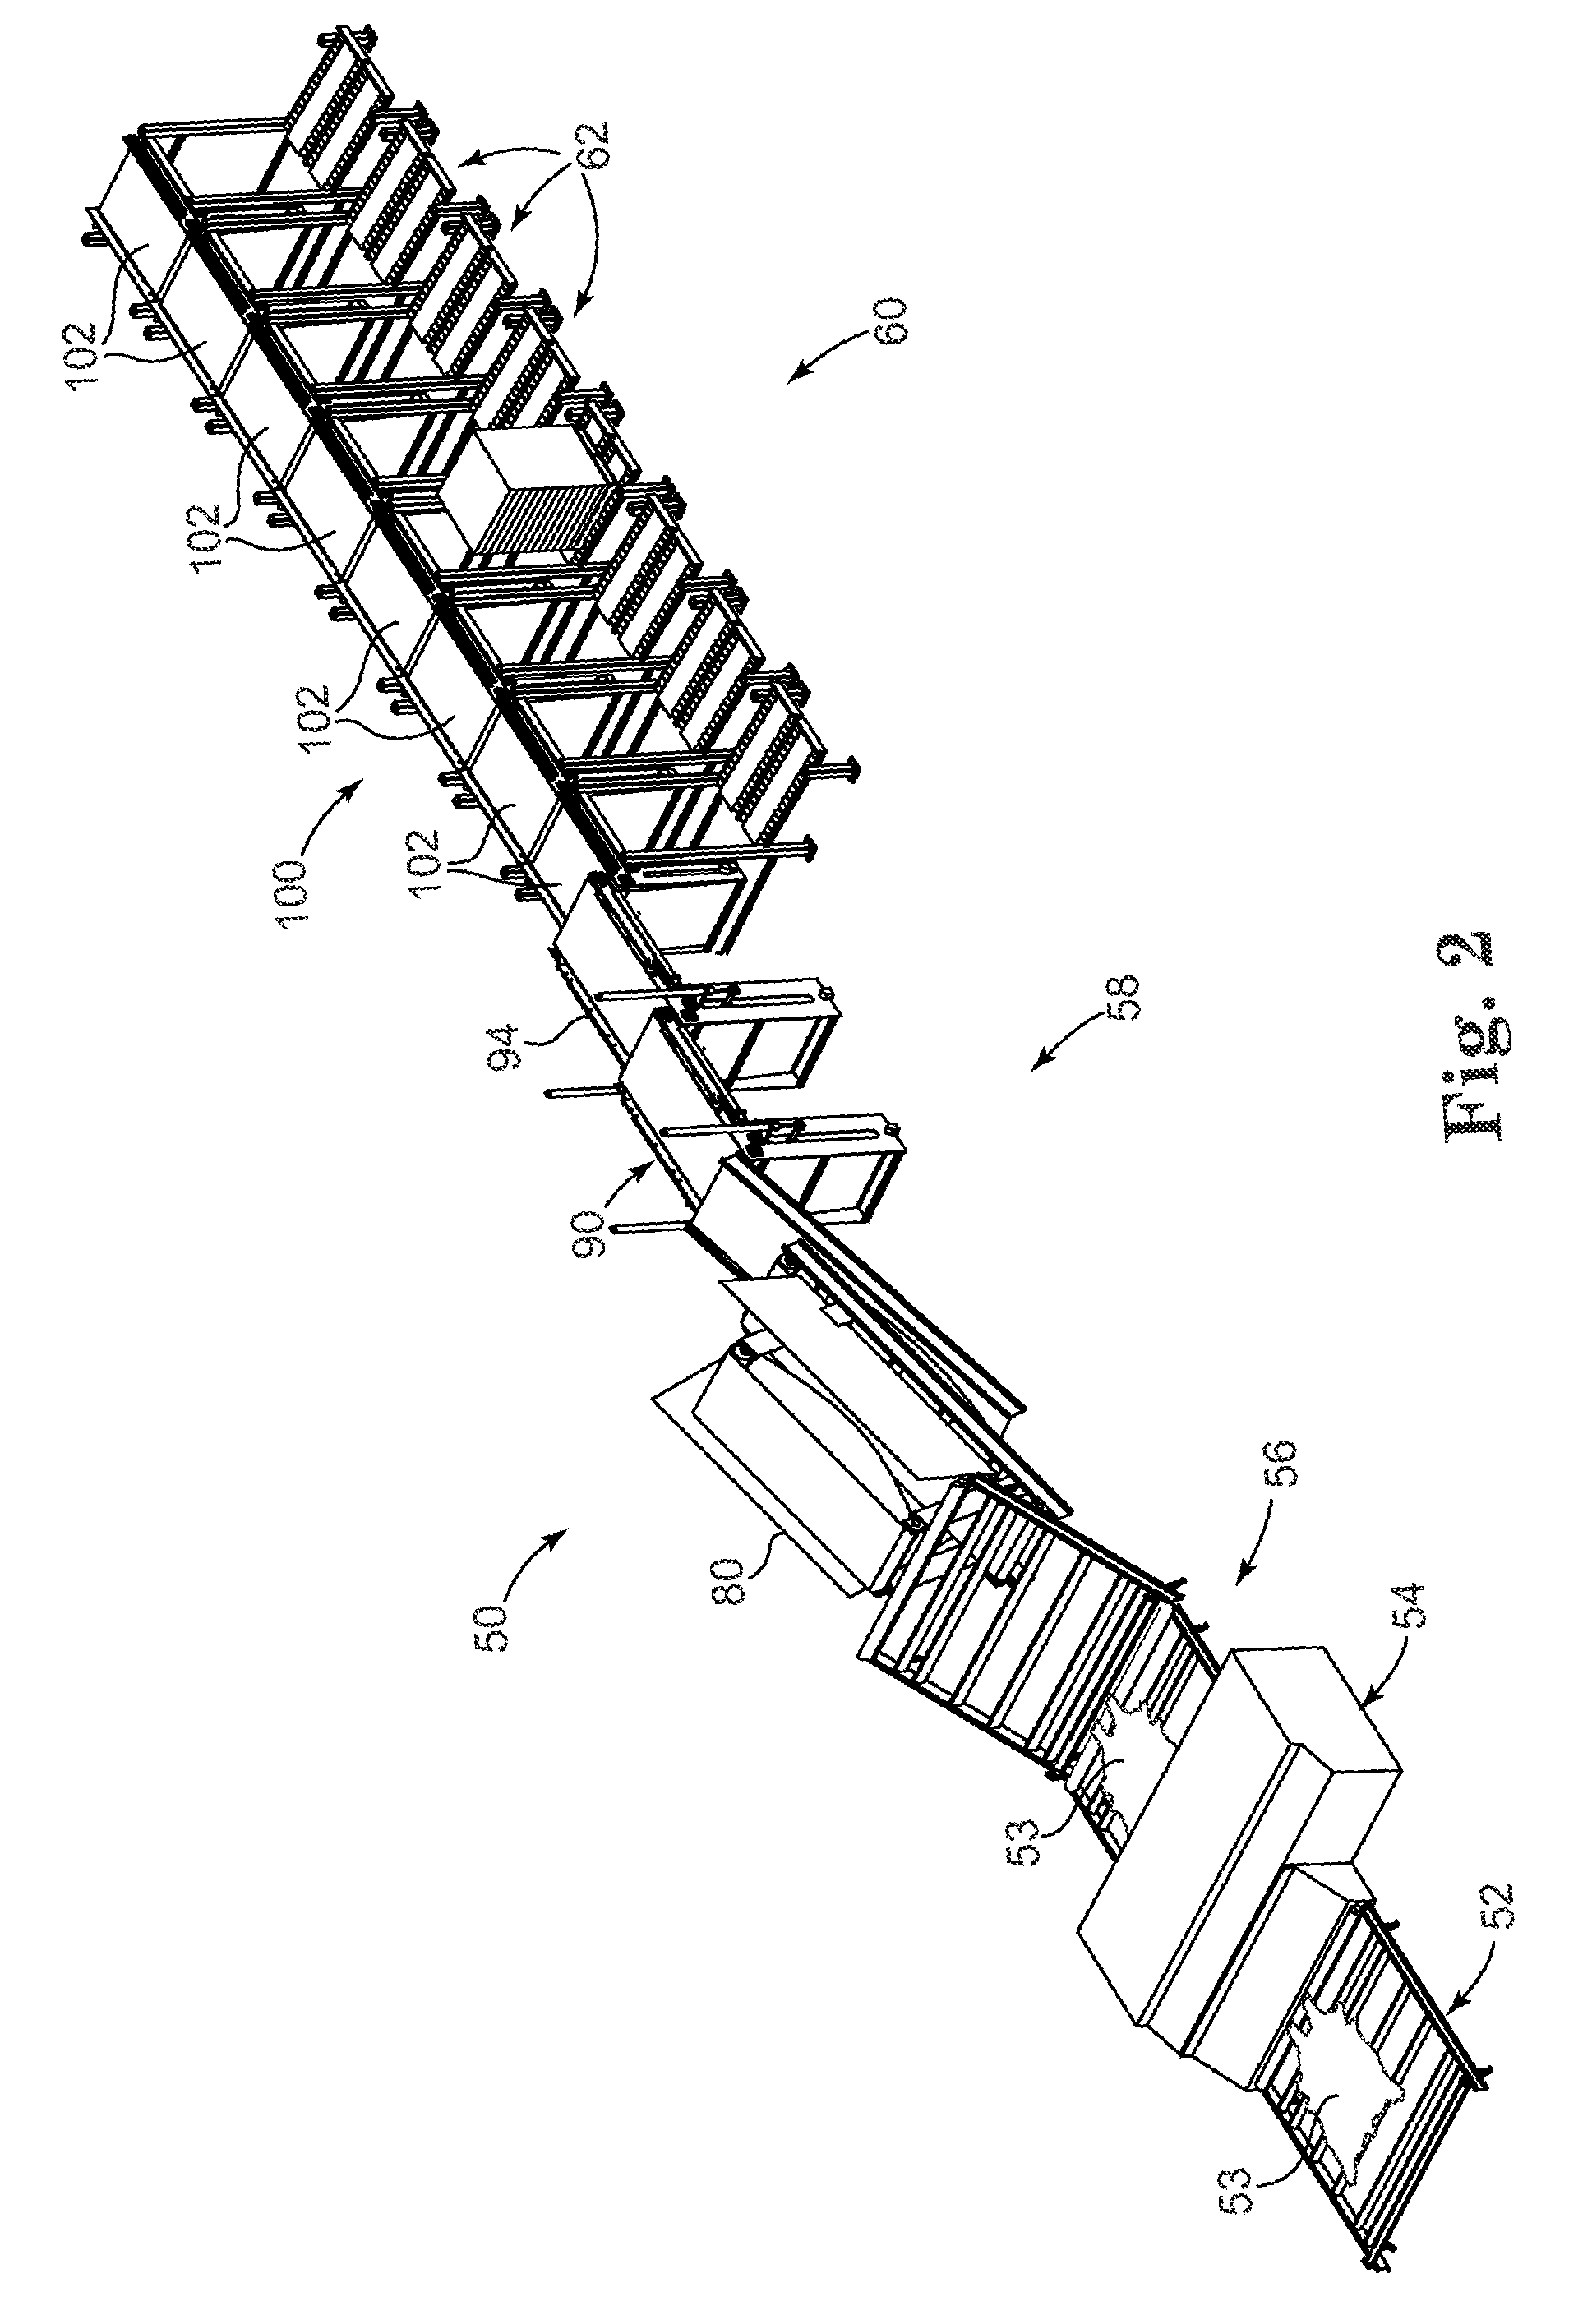 Hide folding system and method